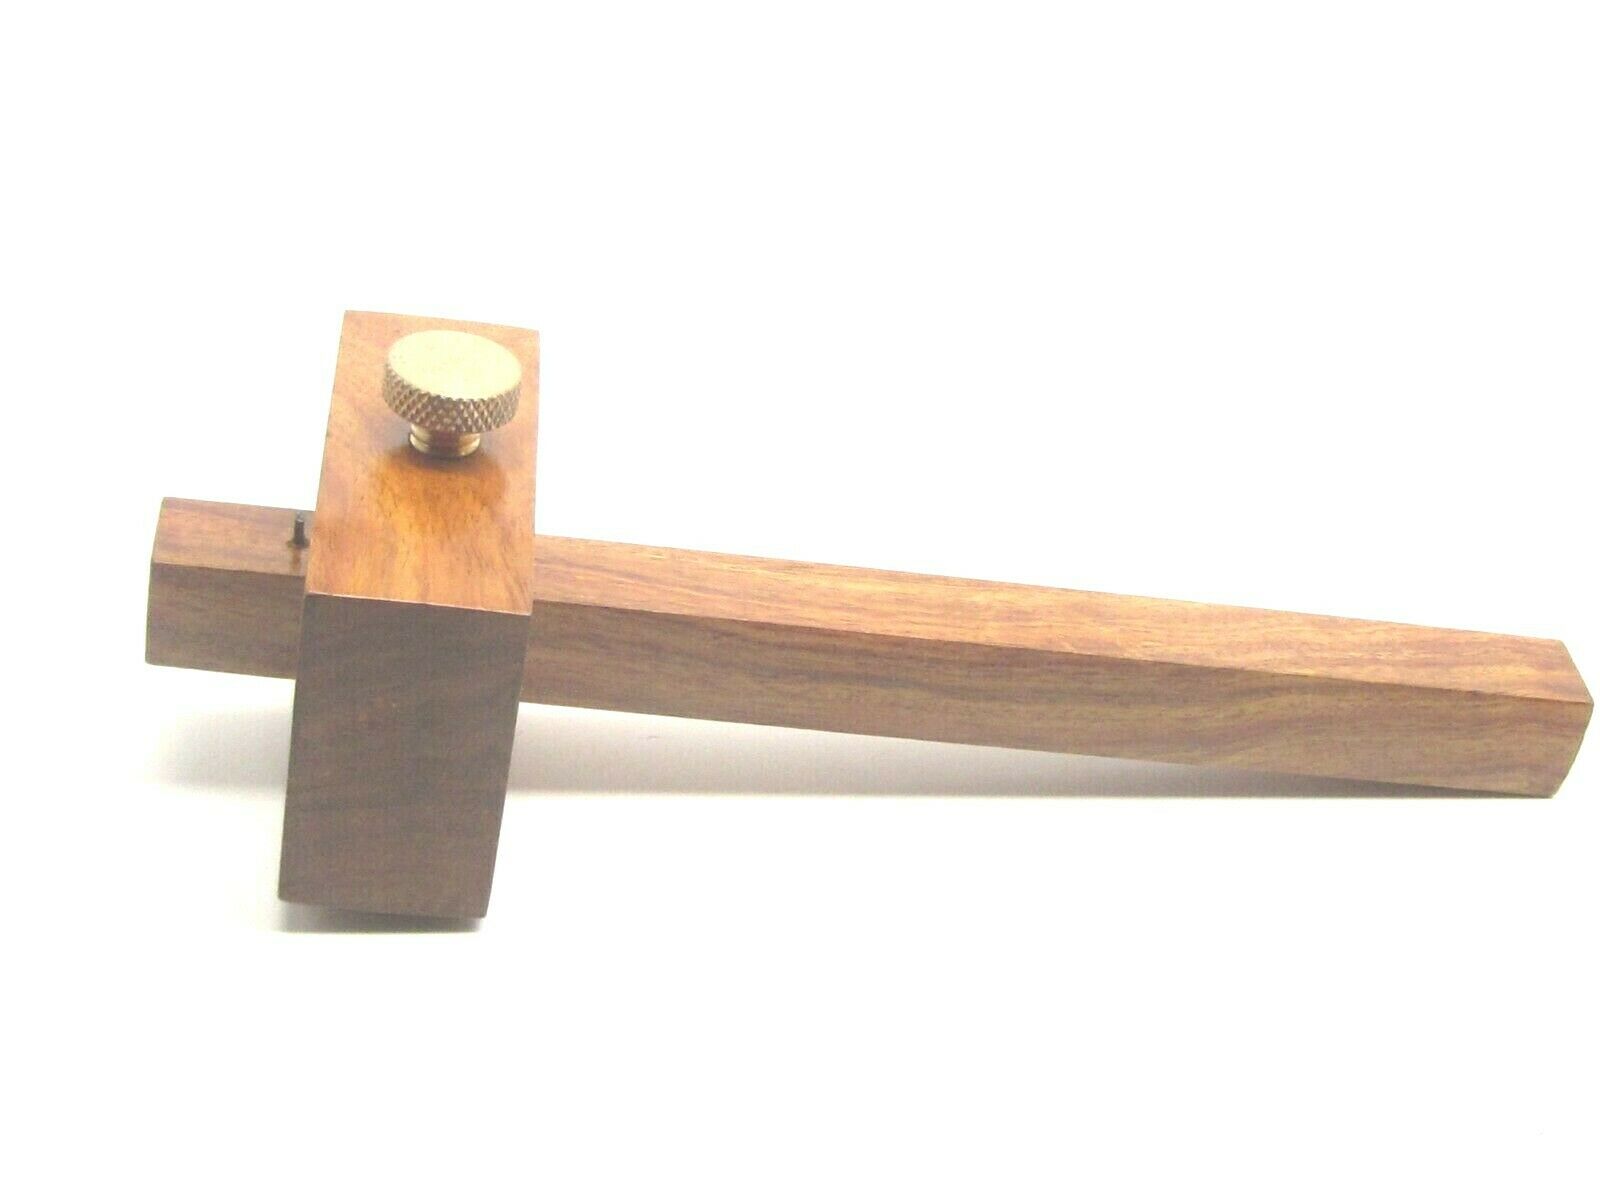 An image of a woodworking mortise marking gauge from UJ Ramelson